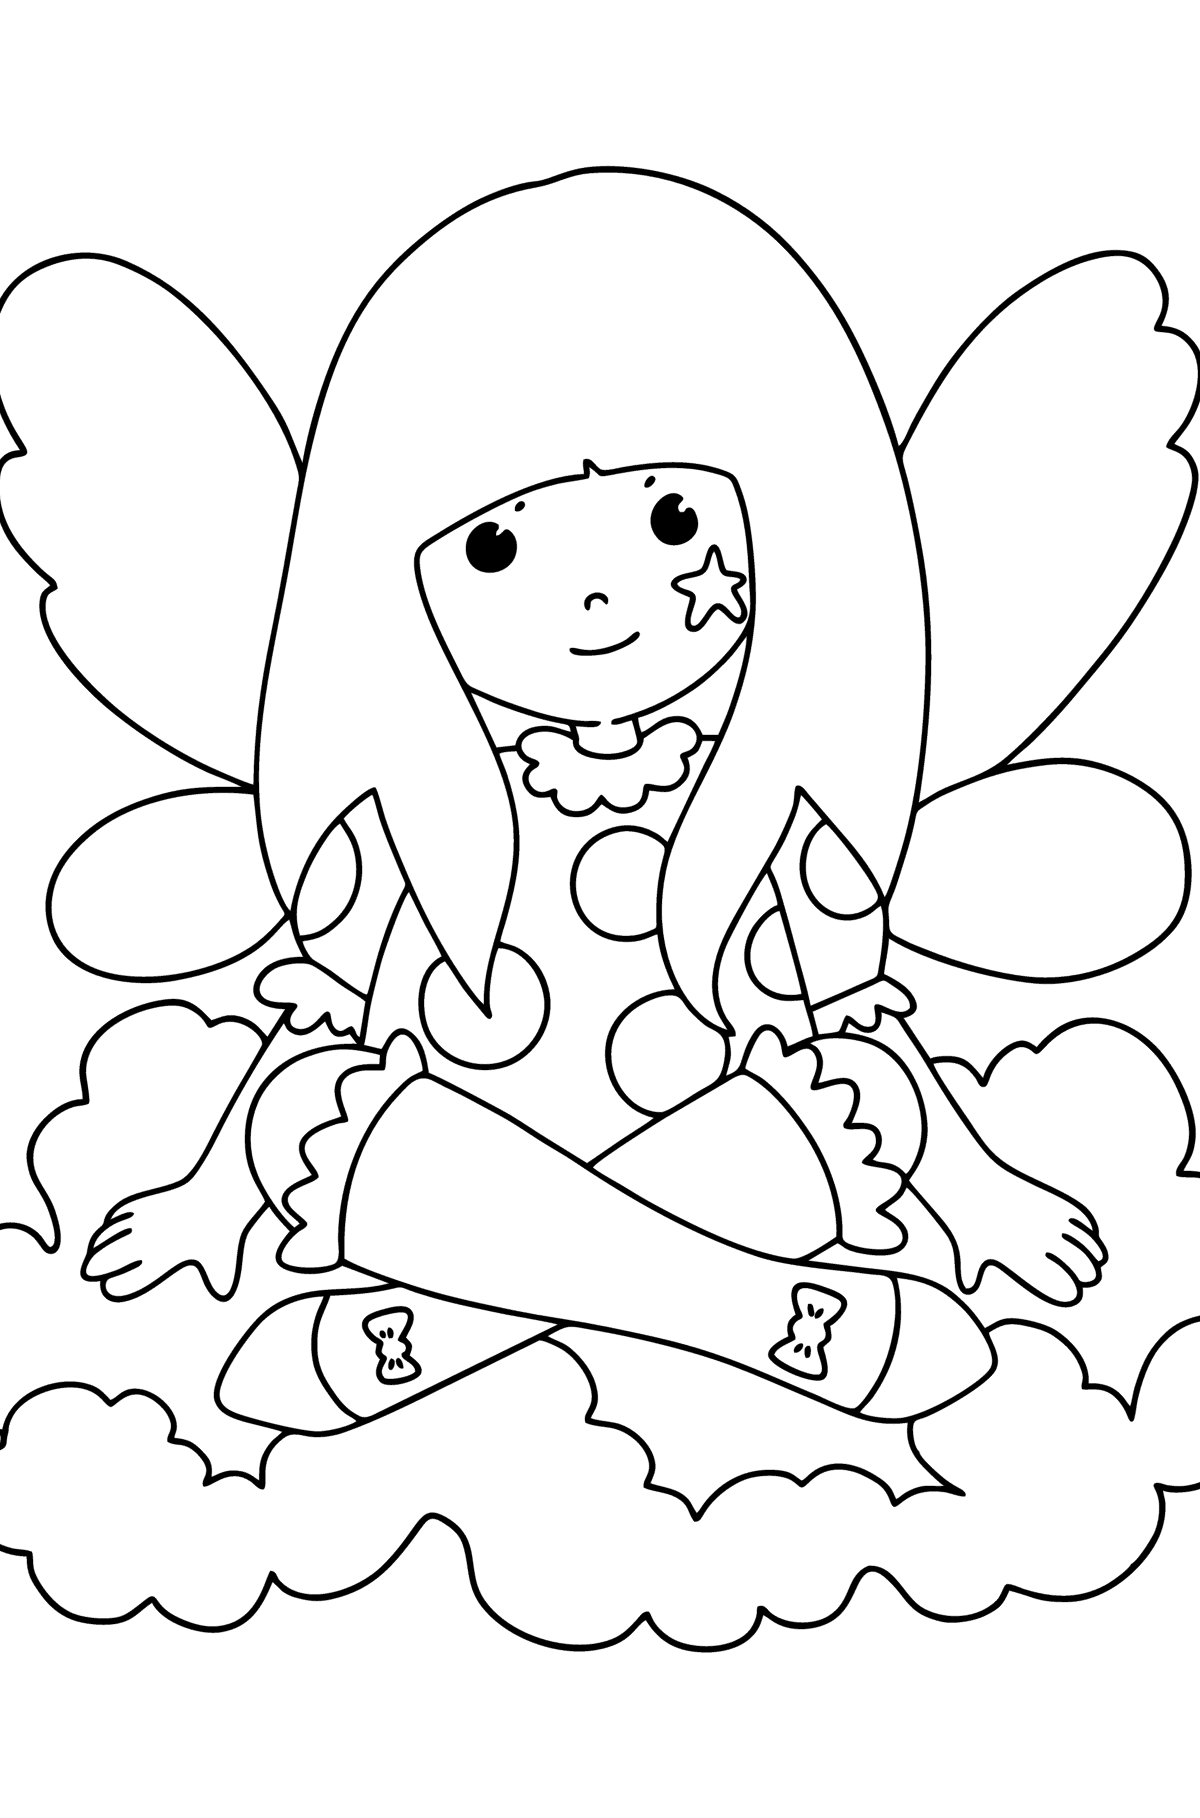 Cartoon fairy coloring page - Coloring Pages for Kids